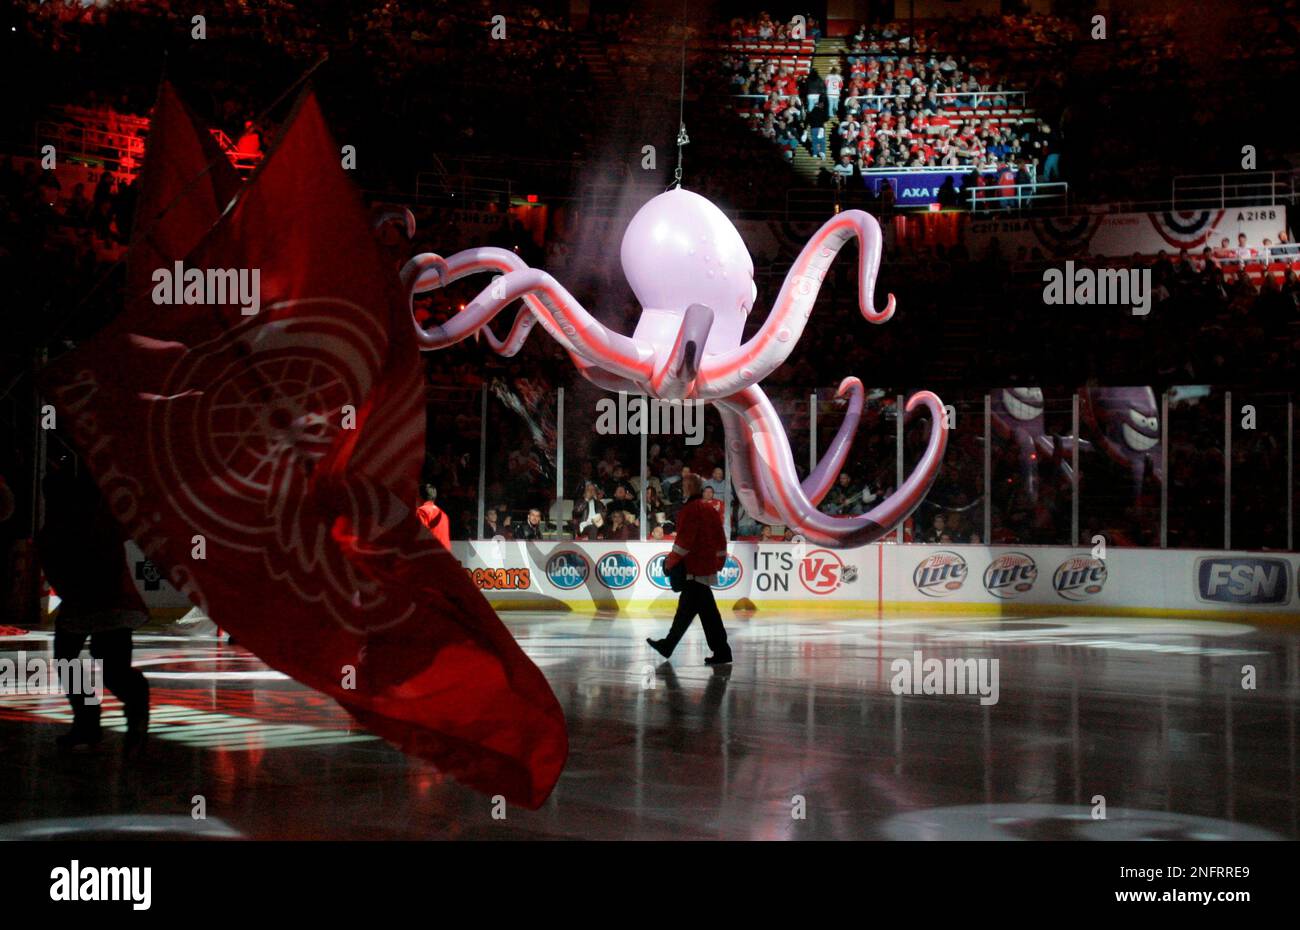 April 15, 2012: Detroit Red Wings mascot Al the Octopus is lowered from the  rafters during